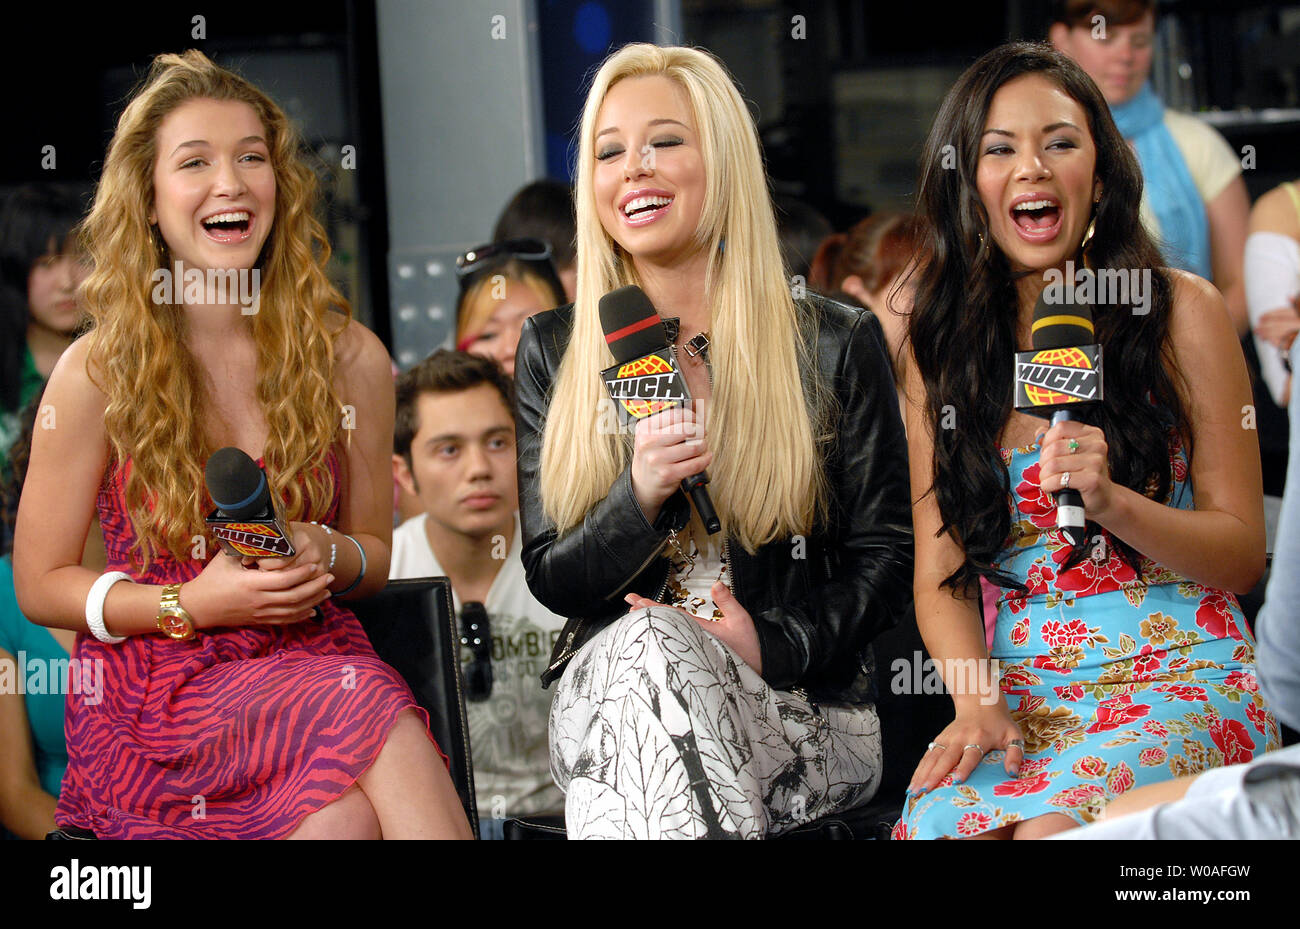 The stars of the upcoming movie 'Bratz' (L-R) Nathalia Ramos, Skyler Shaye and Janel Parrish attend a fan and celebrity showcase at the famed street-level studios of MuchMusic in Toronto, Canada on July 26, 2007. The young stars portray the popular Bratz fashion dolls in the live action feature film scheduled to hit theaters August 3. (UPI Photo/Christine Chew) Stock Photo